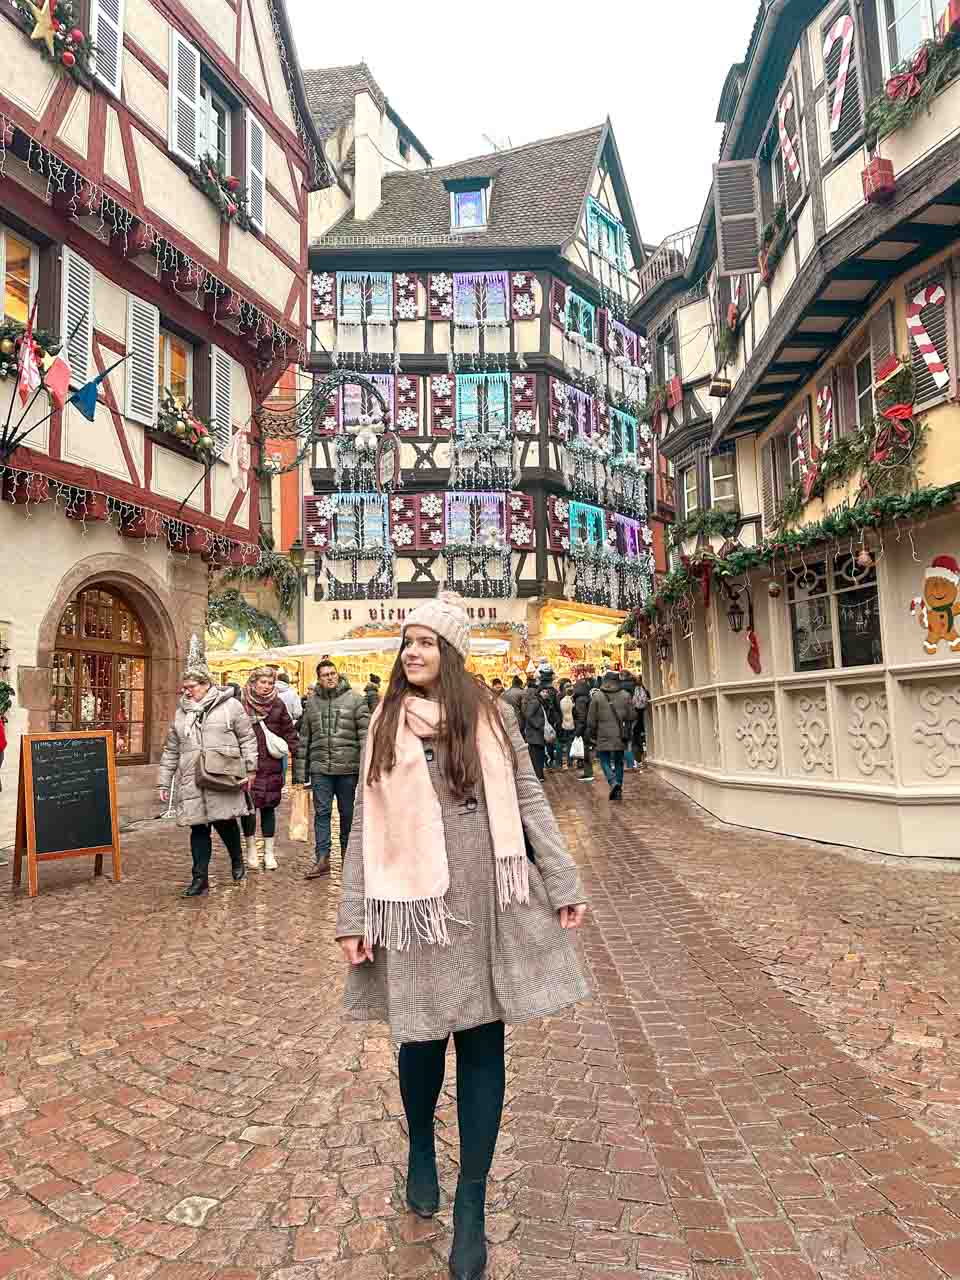 A brunette in a winter coat walking along a cobblestone street in Colmar, with beautifully decorated half-timbered houses and festive decorations in the background